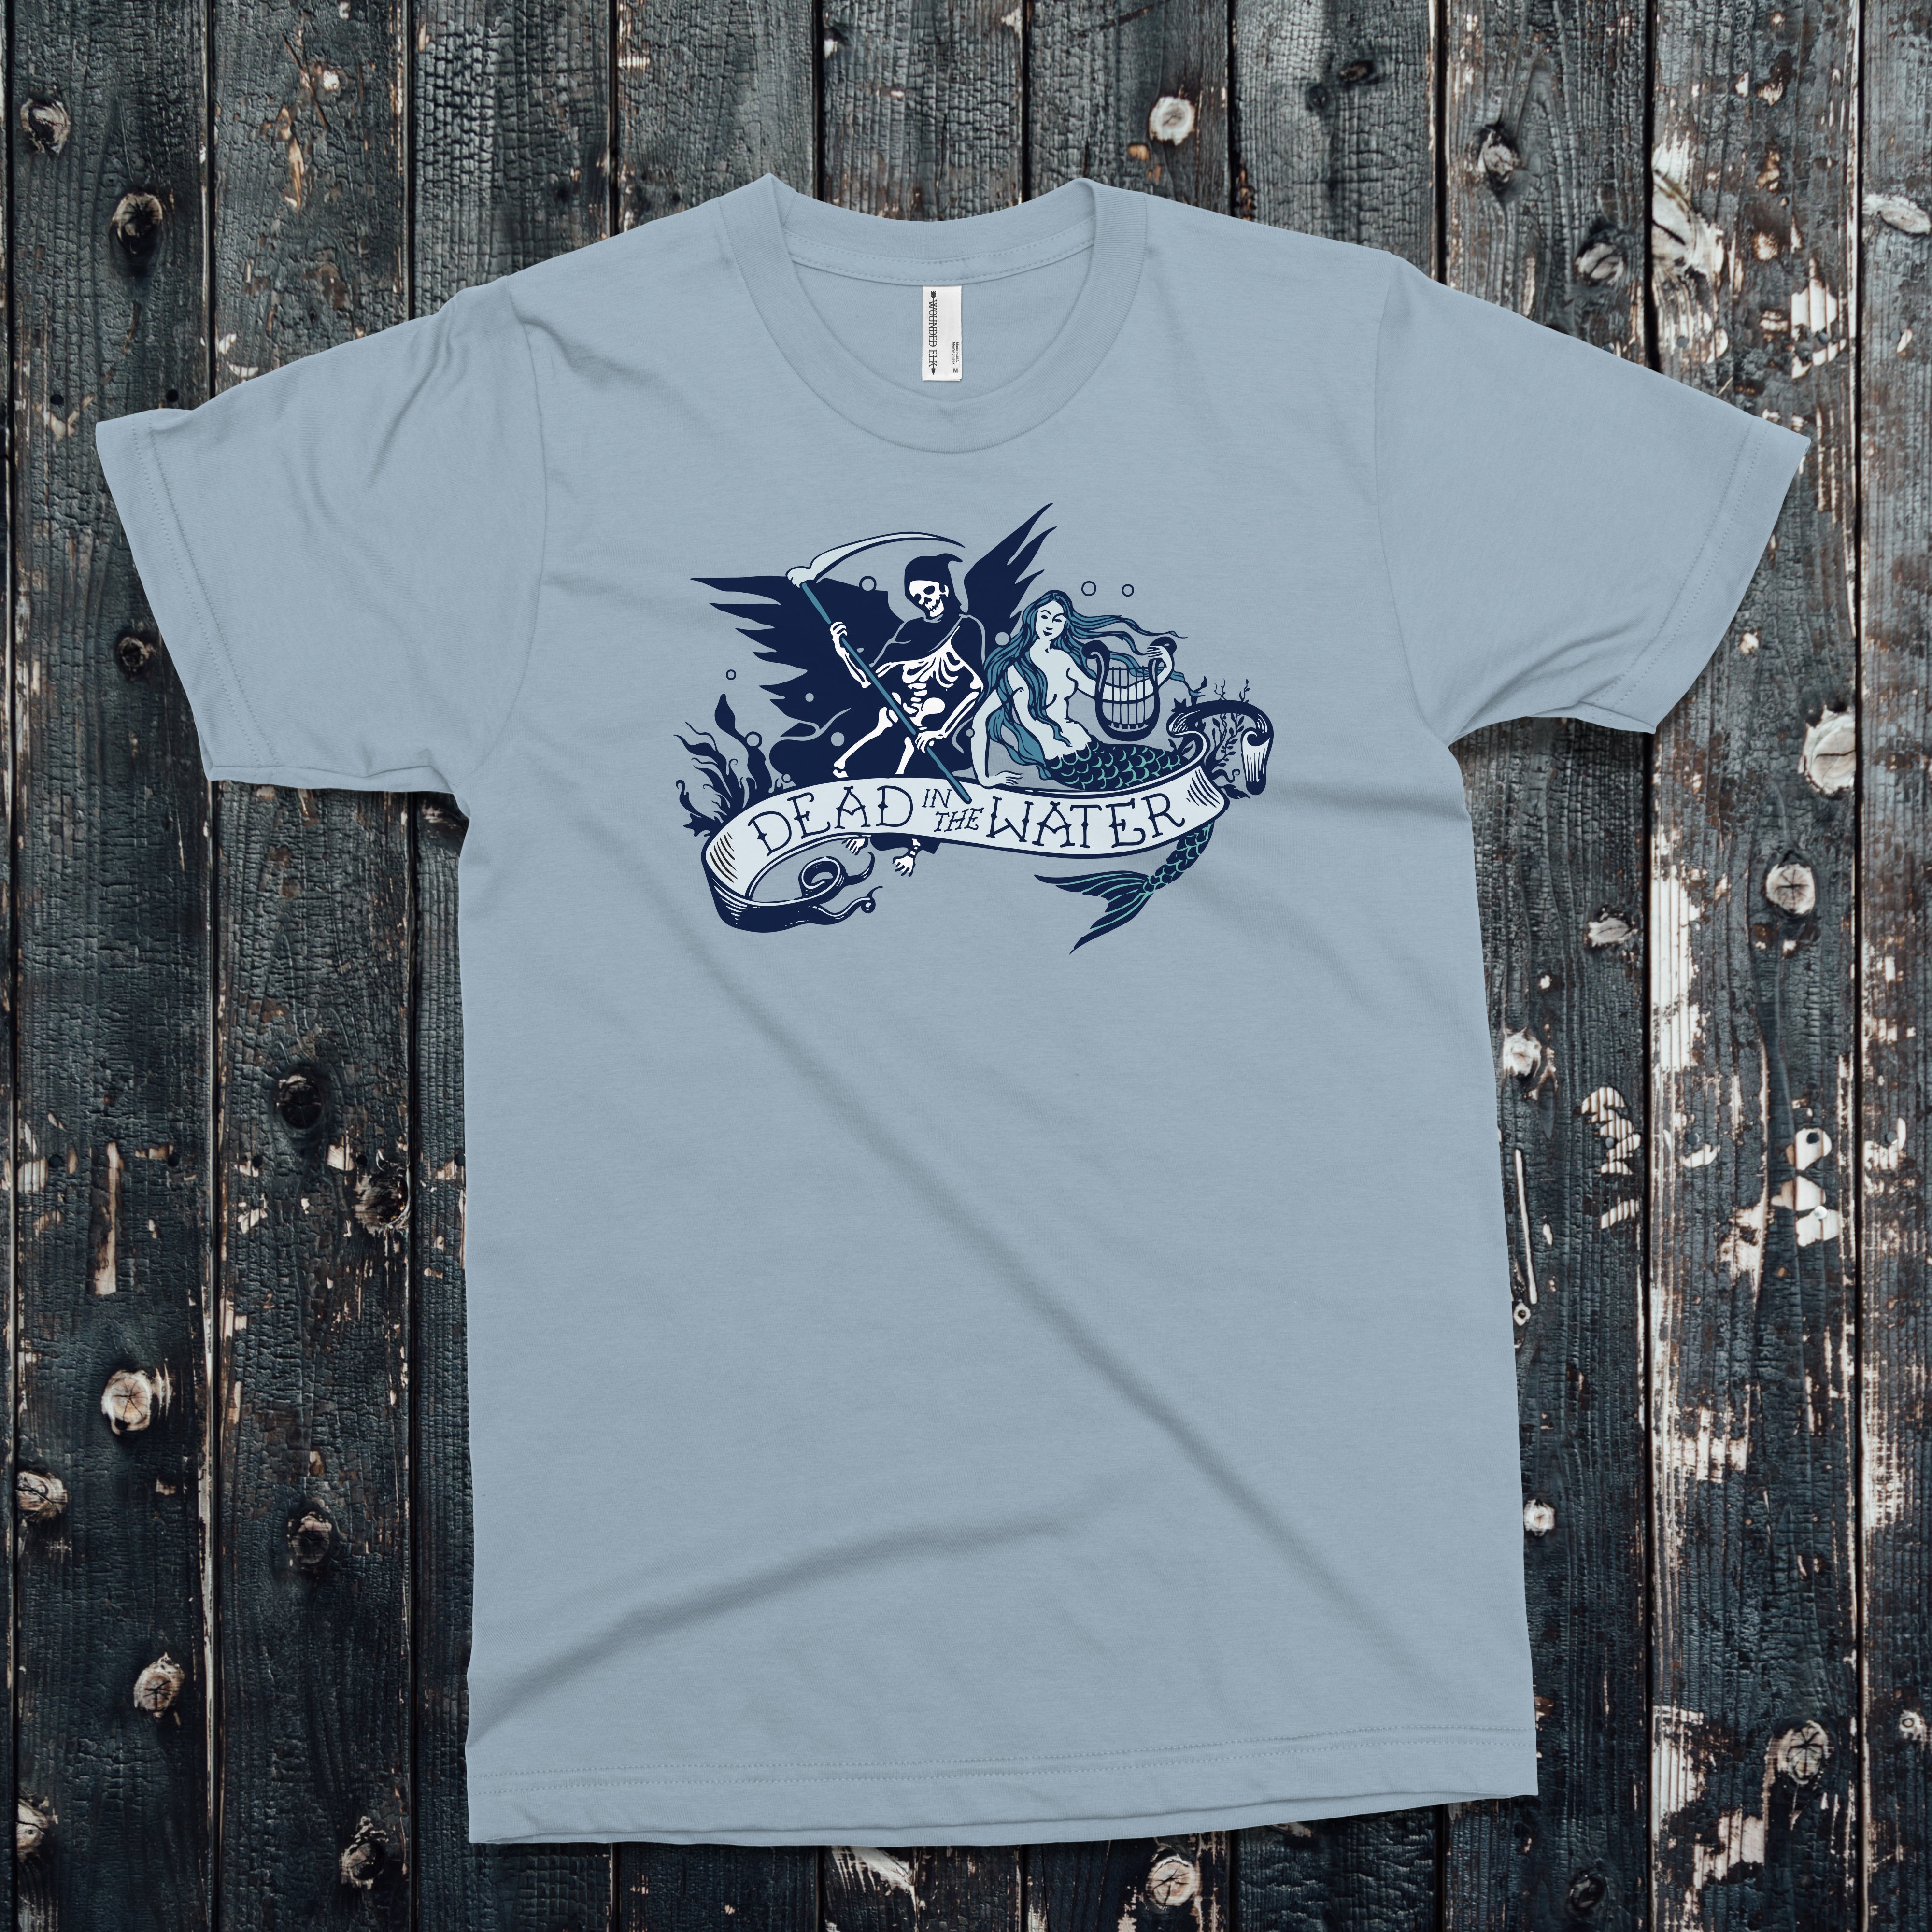 Dead in the Water T-Shirt